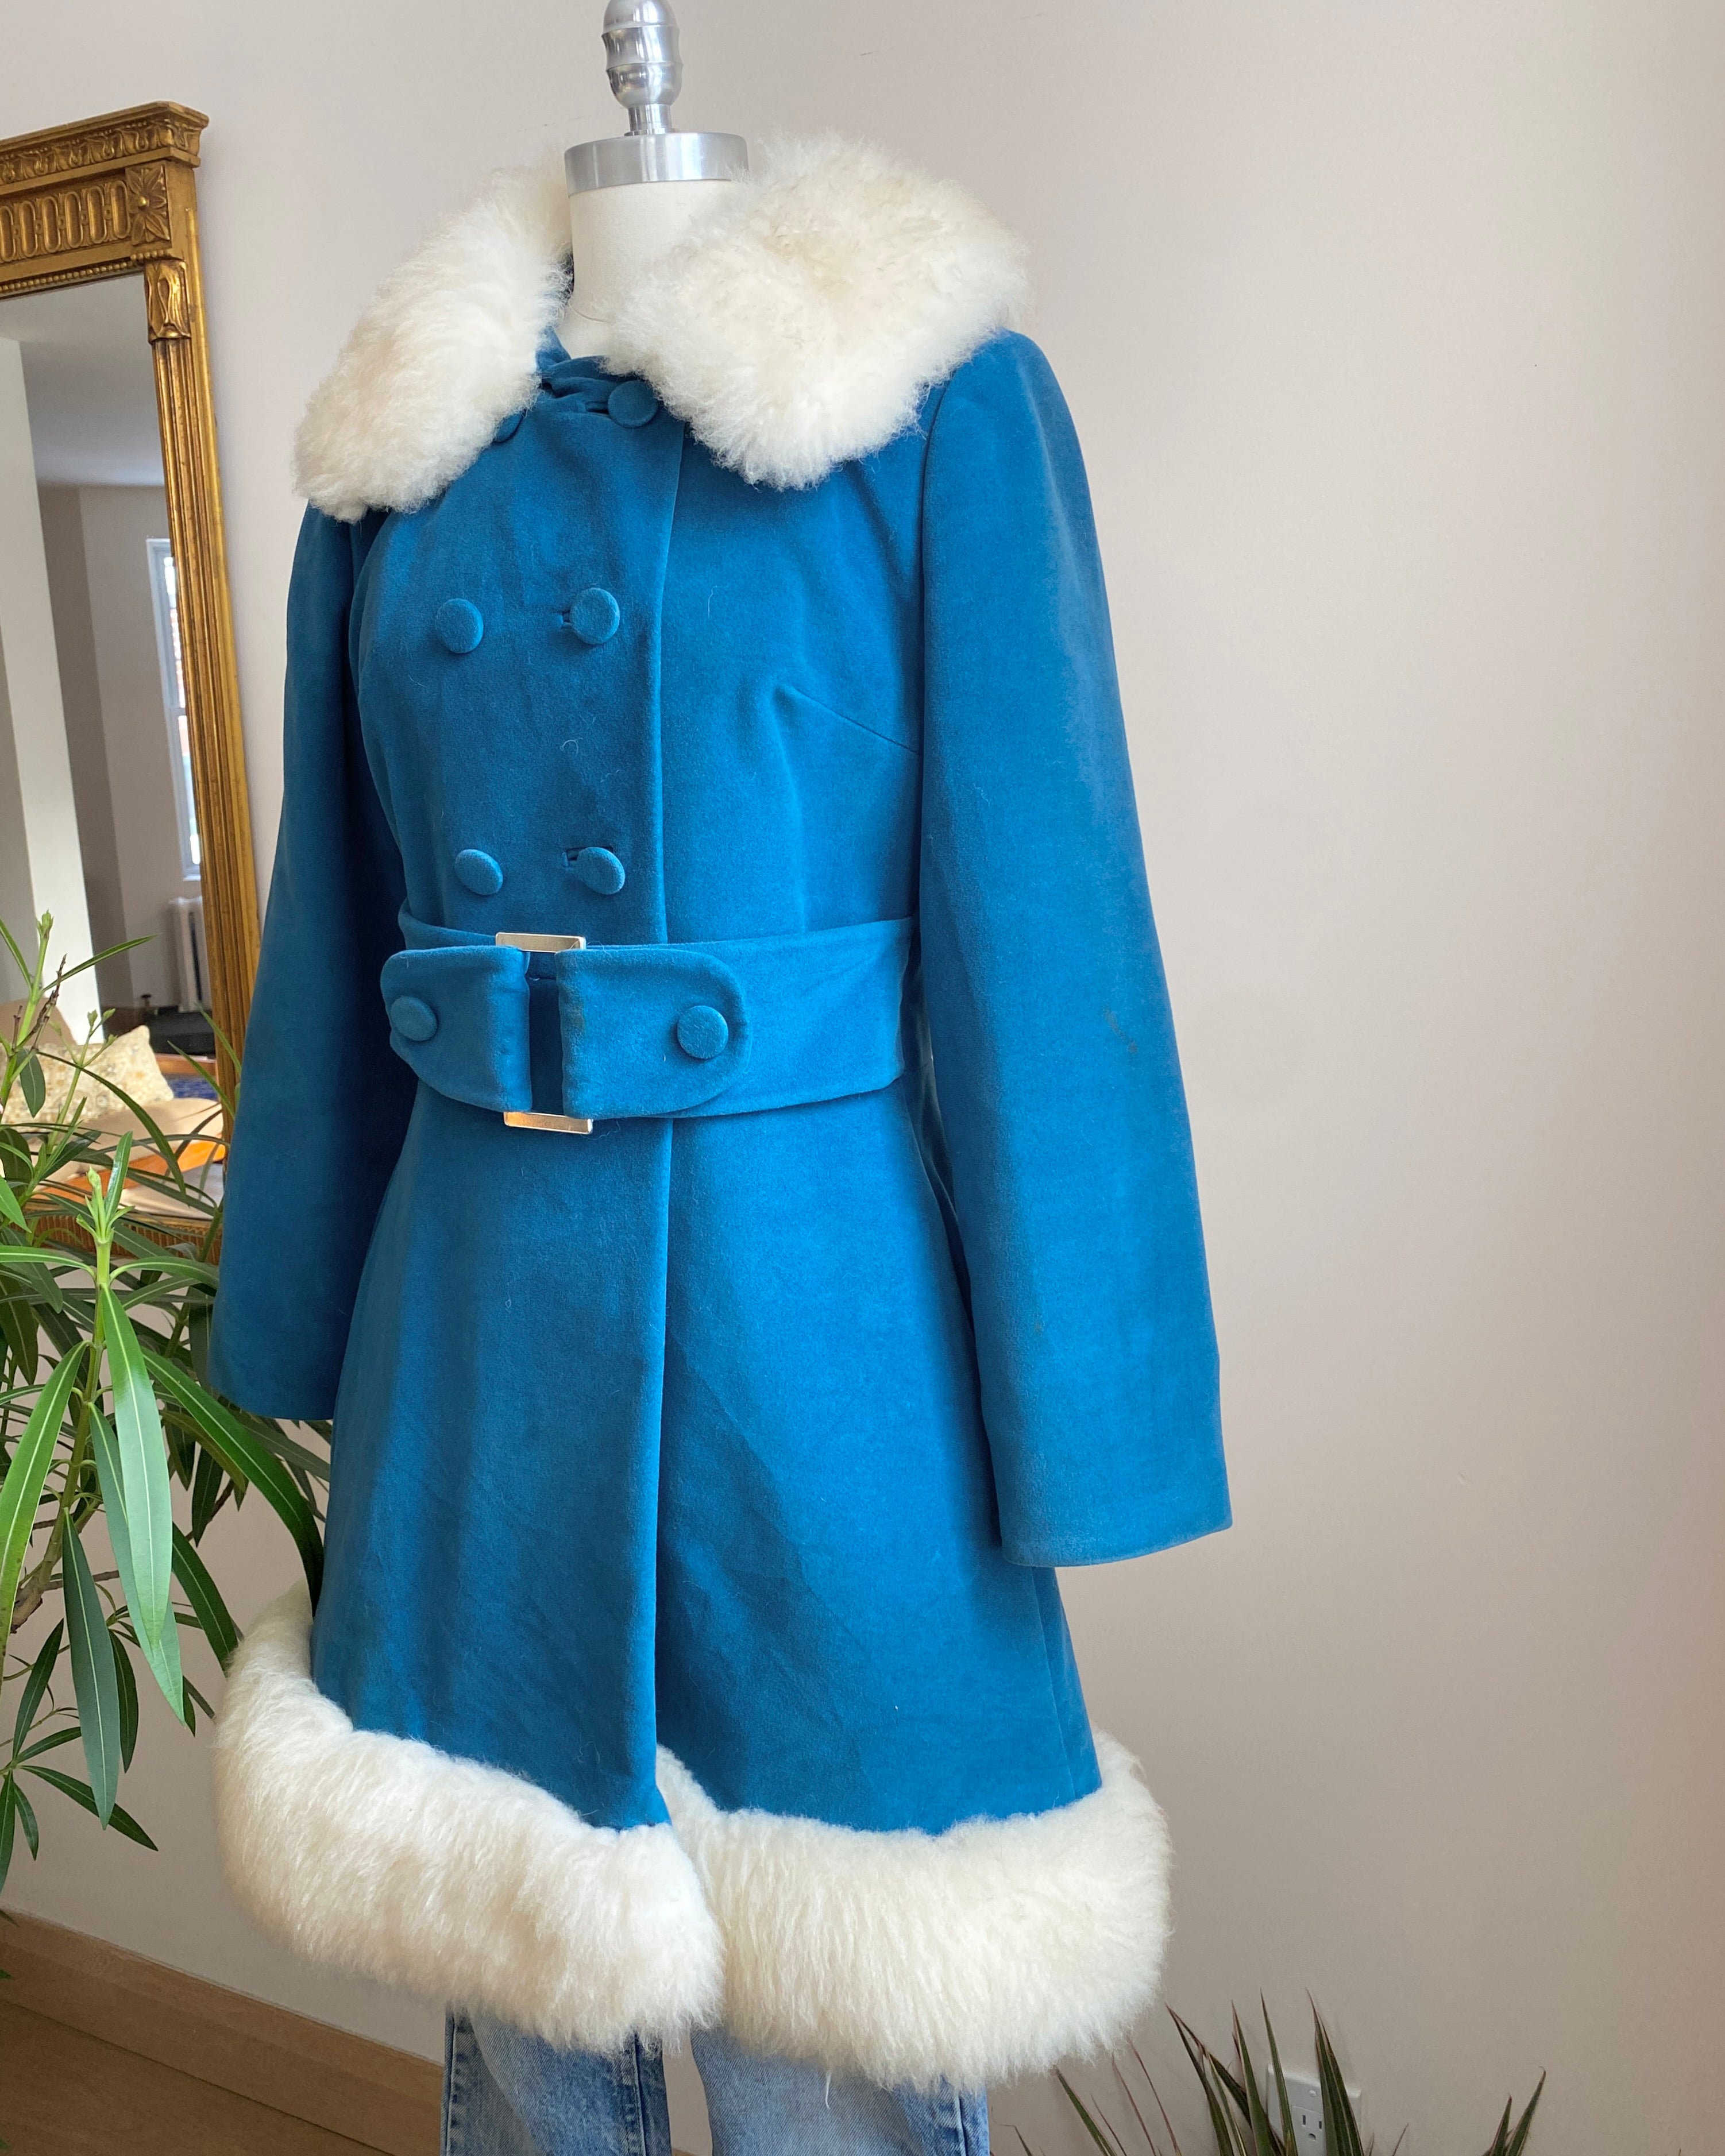 Vintage 1960s COUNTRY PACER Penny Lane Blue Velvet Double Breasted With Shearling Trim Coat Jacket S